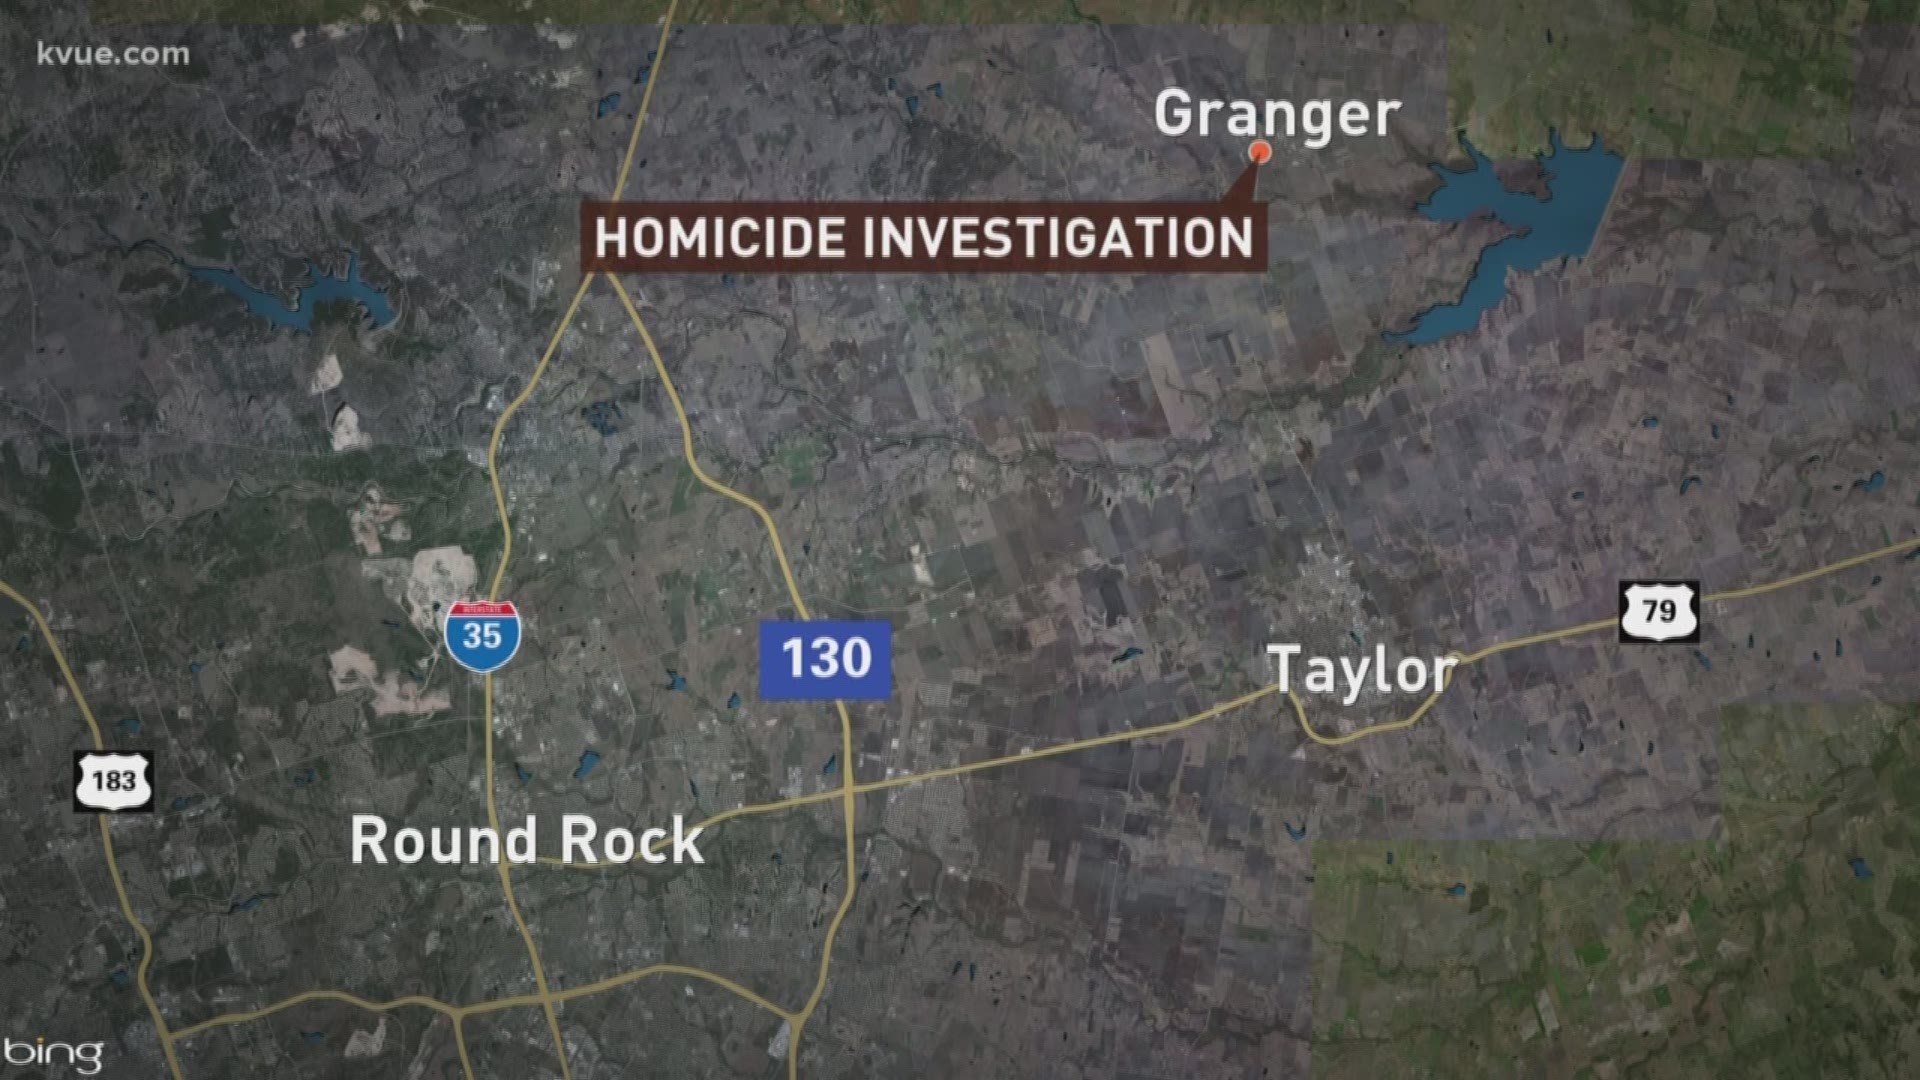 Williamson County Sheriff Robert Chody said in a tweet Tuesday evening that the scene was being investigated as a homicide.